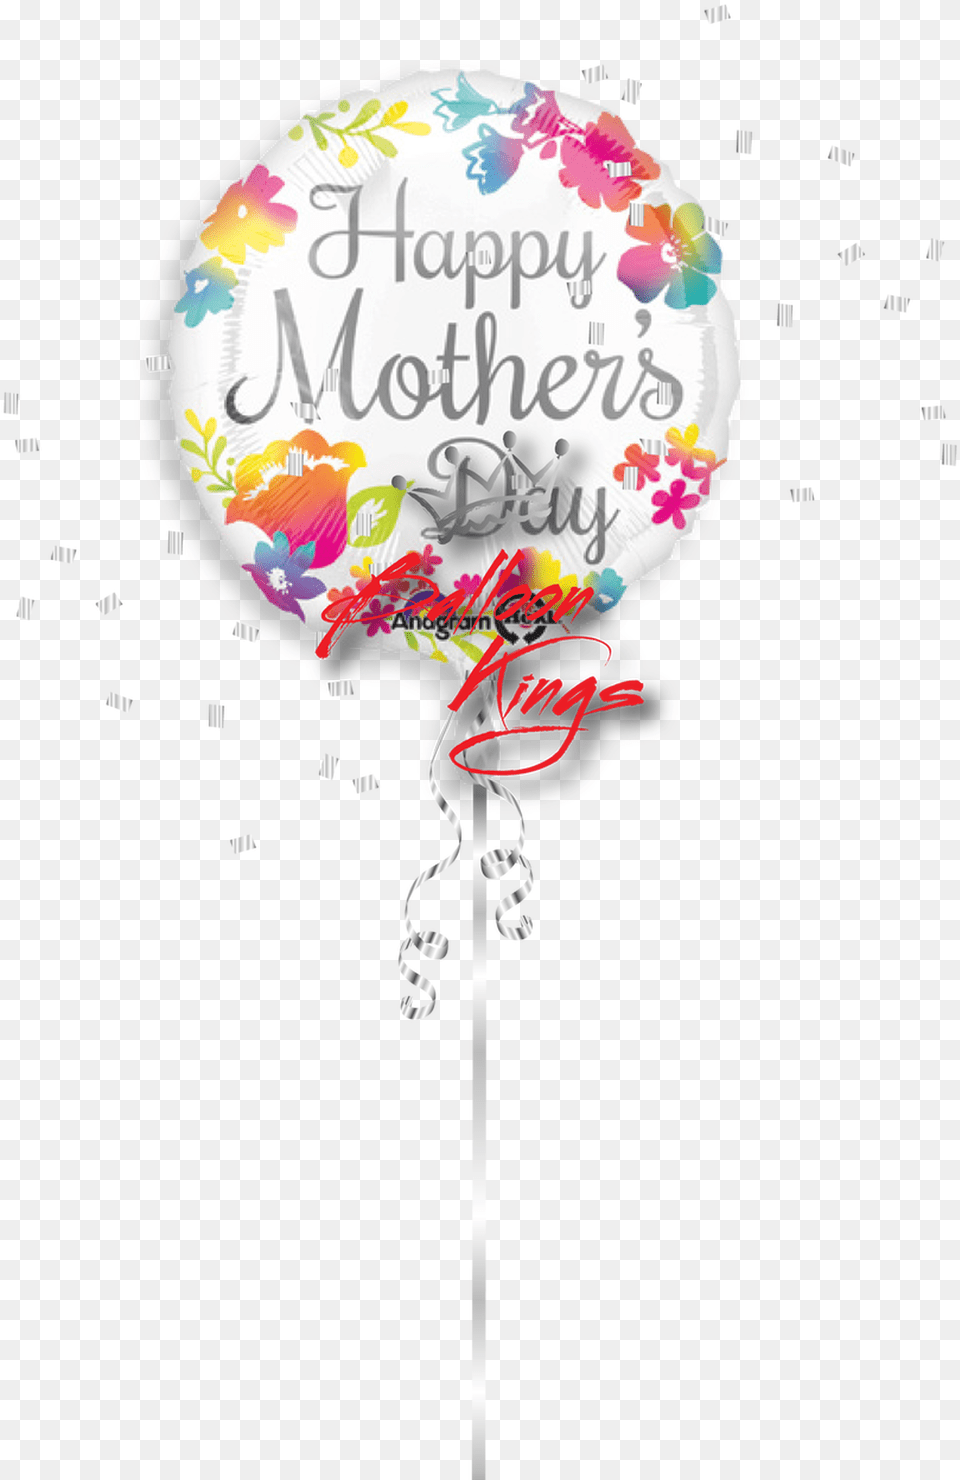 Happy Mothers Day Watercolor Calligraphy Watercolor Happy Mothers Day, Balloon, Food, Sweets Png Image